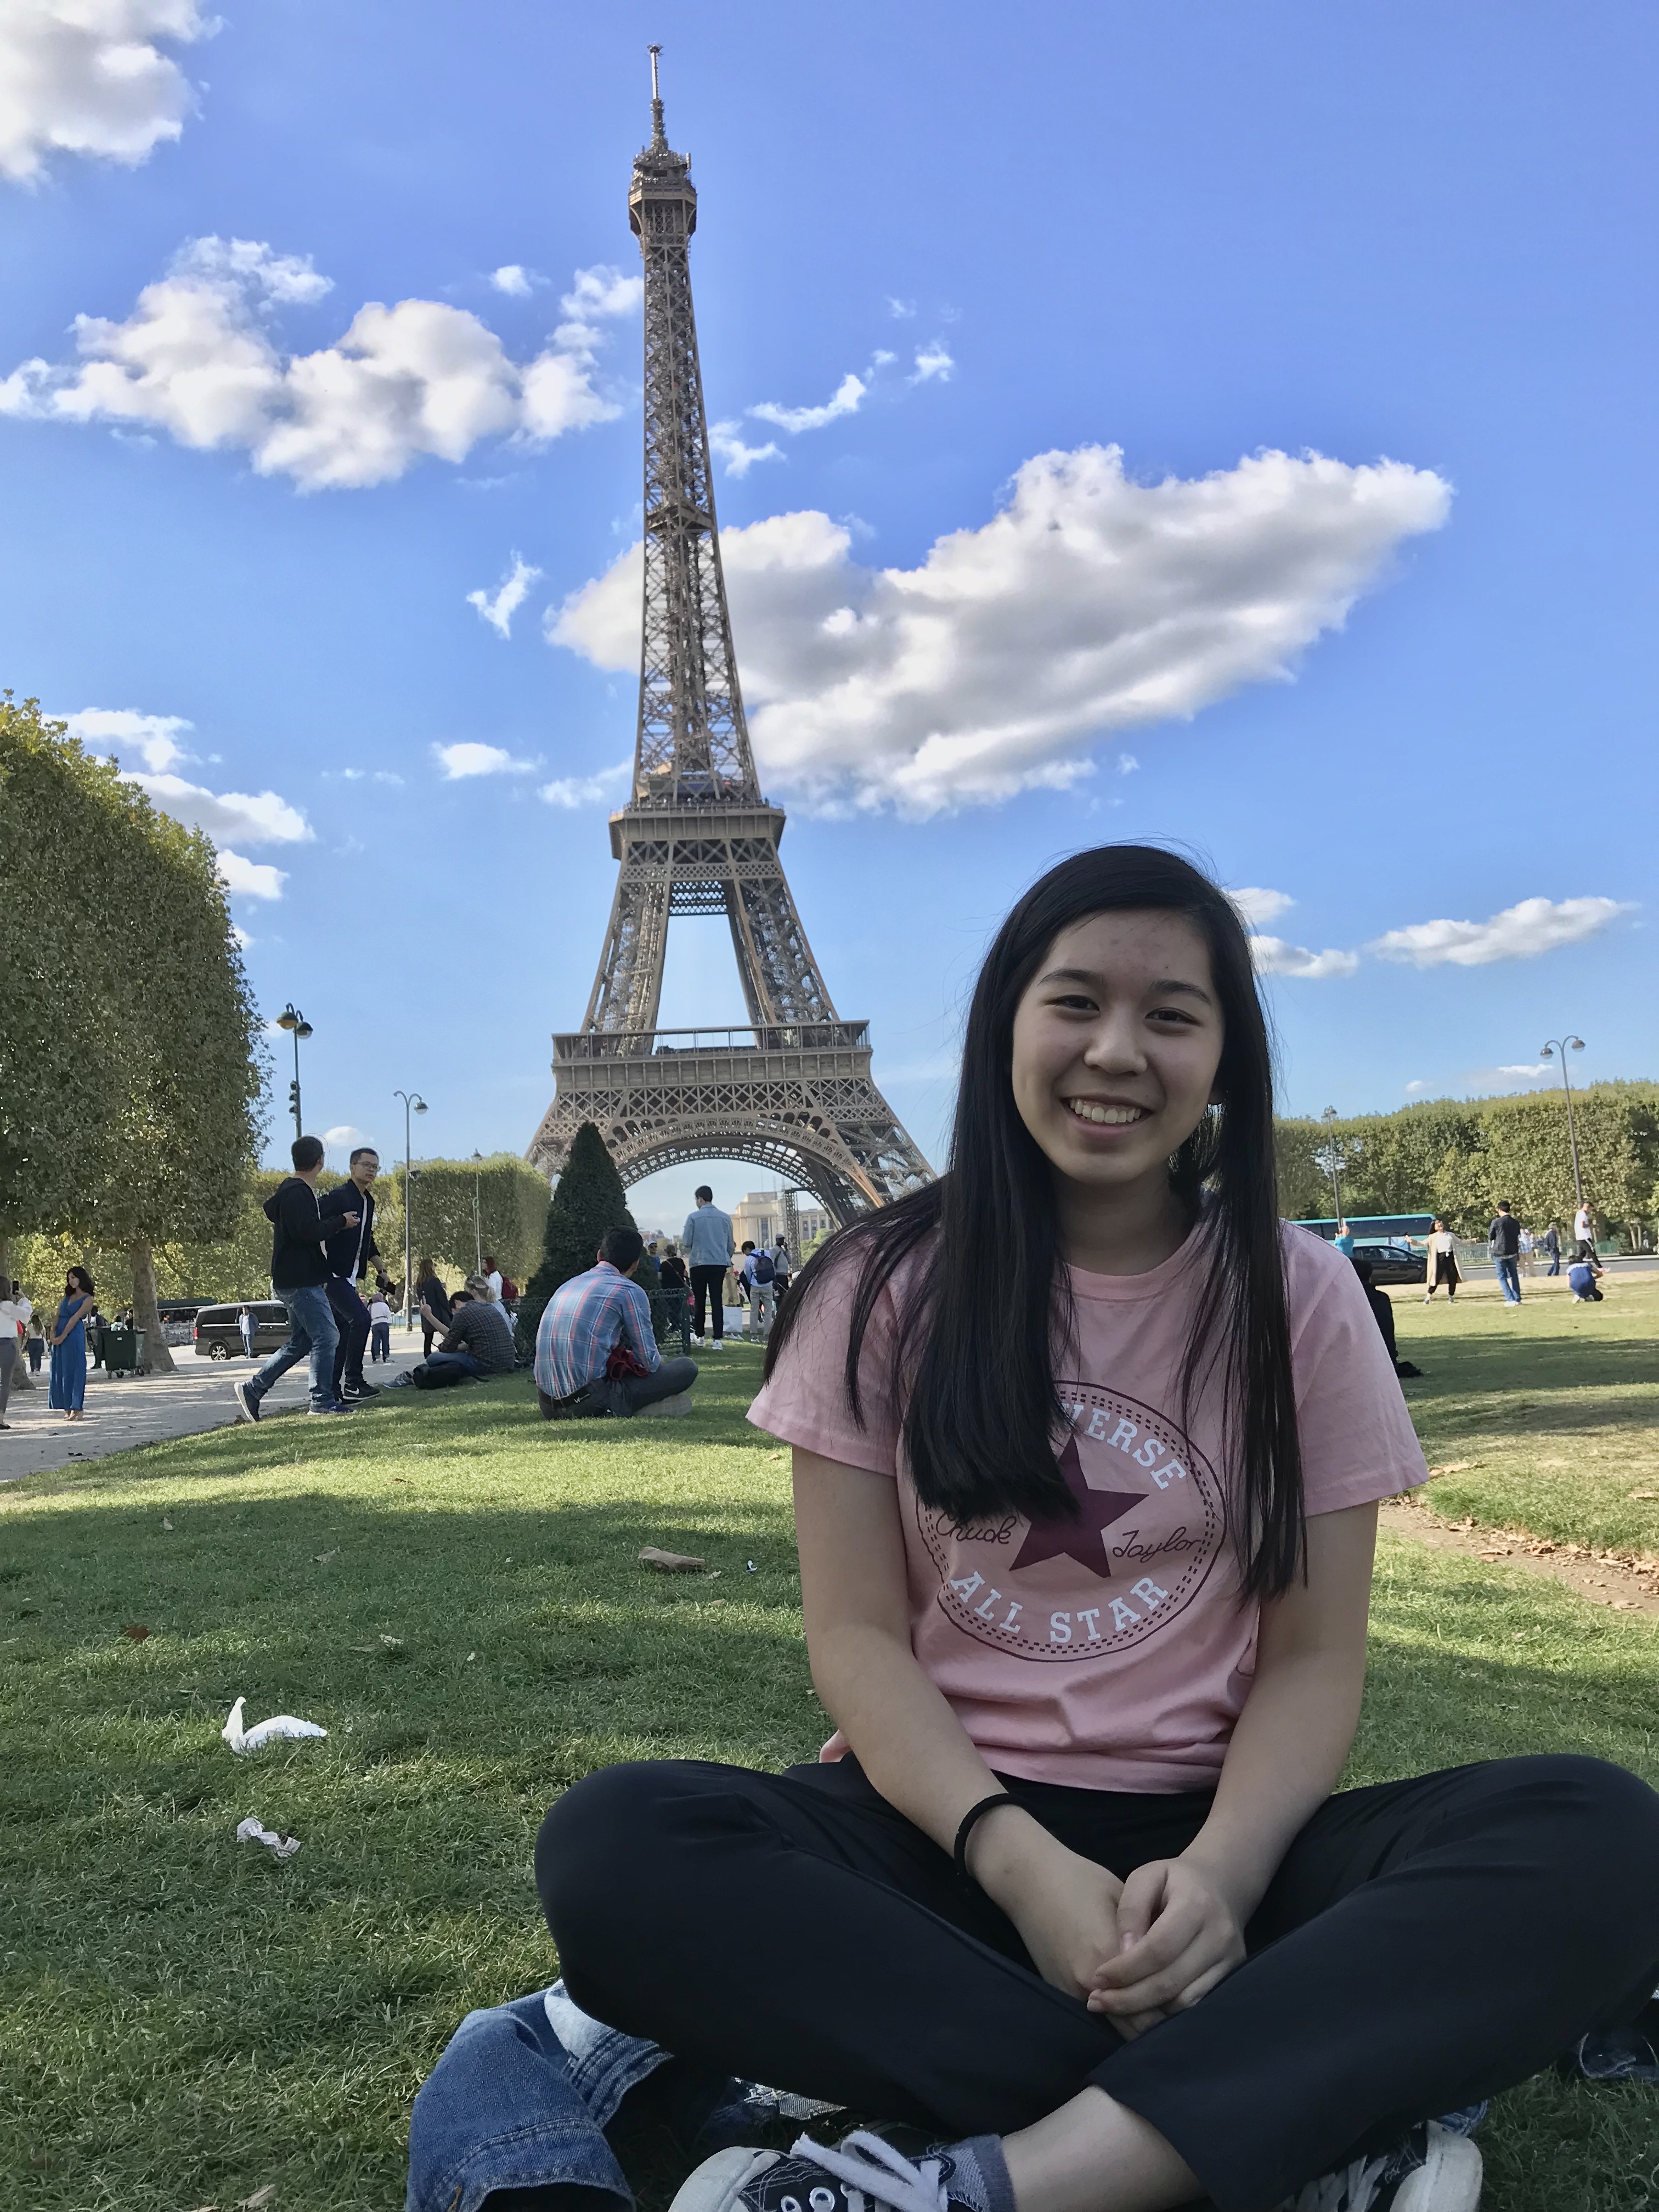 Jocelyn wearing coral t-shirt sitting in front of the Eiffel Tower